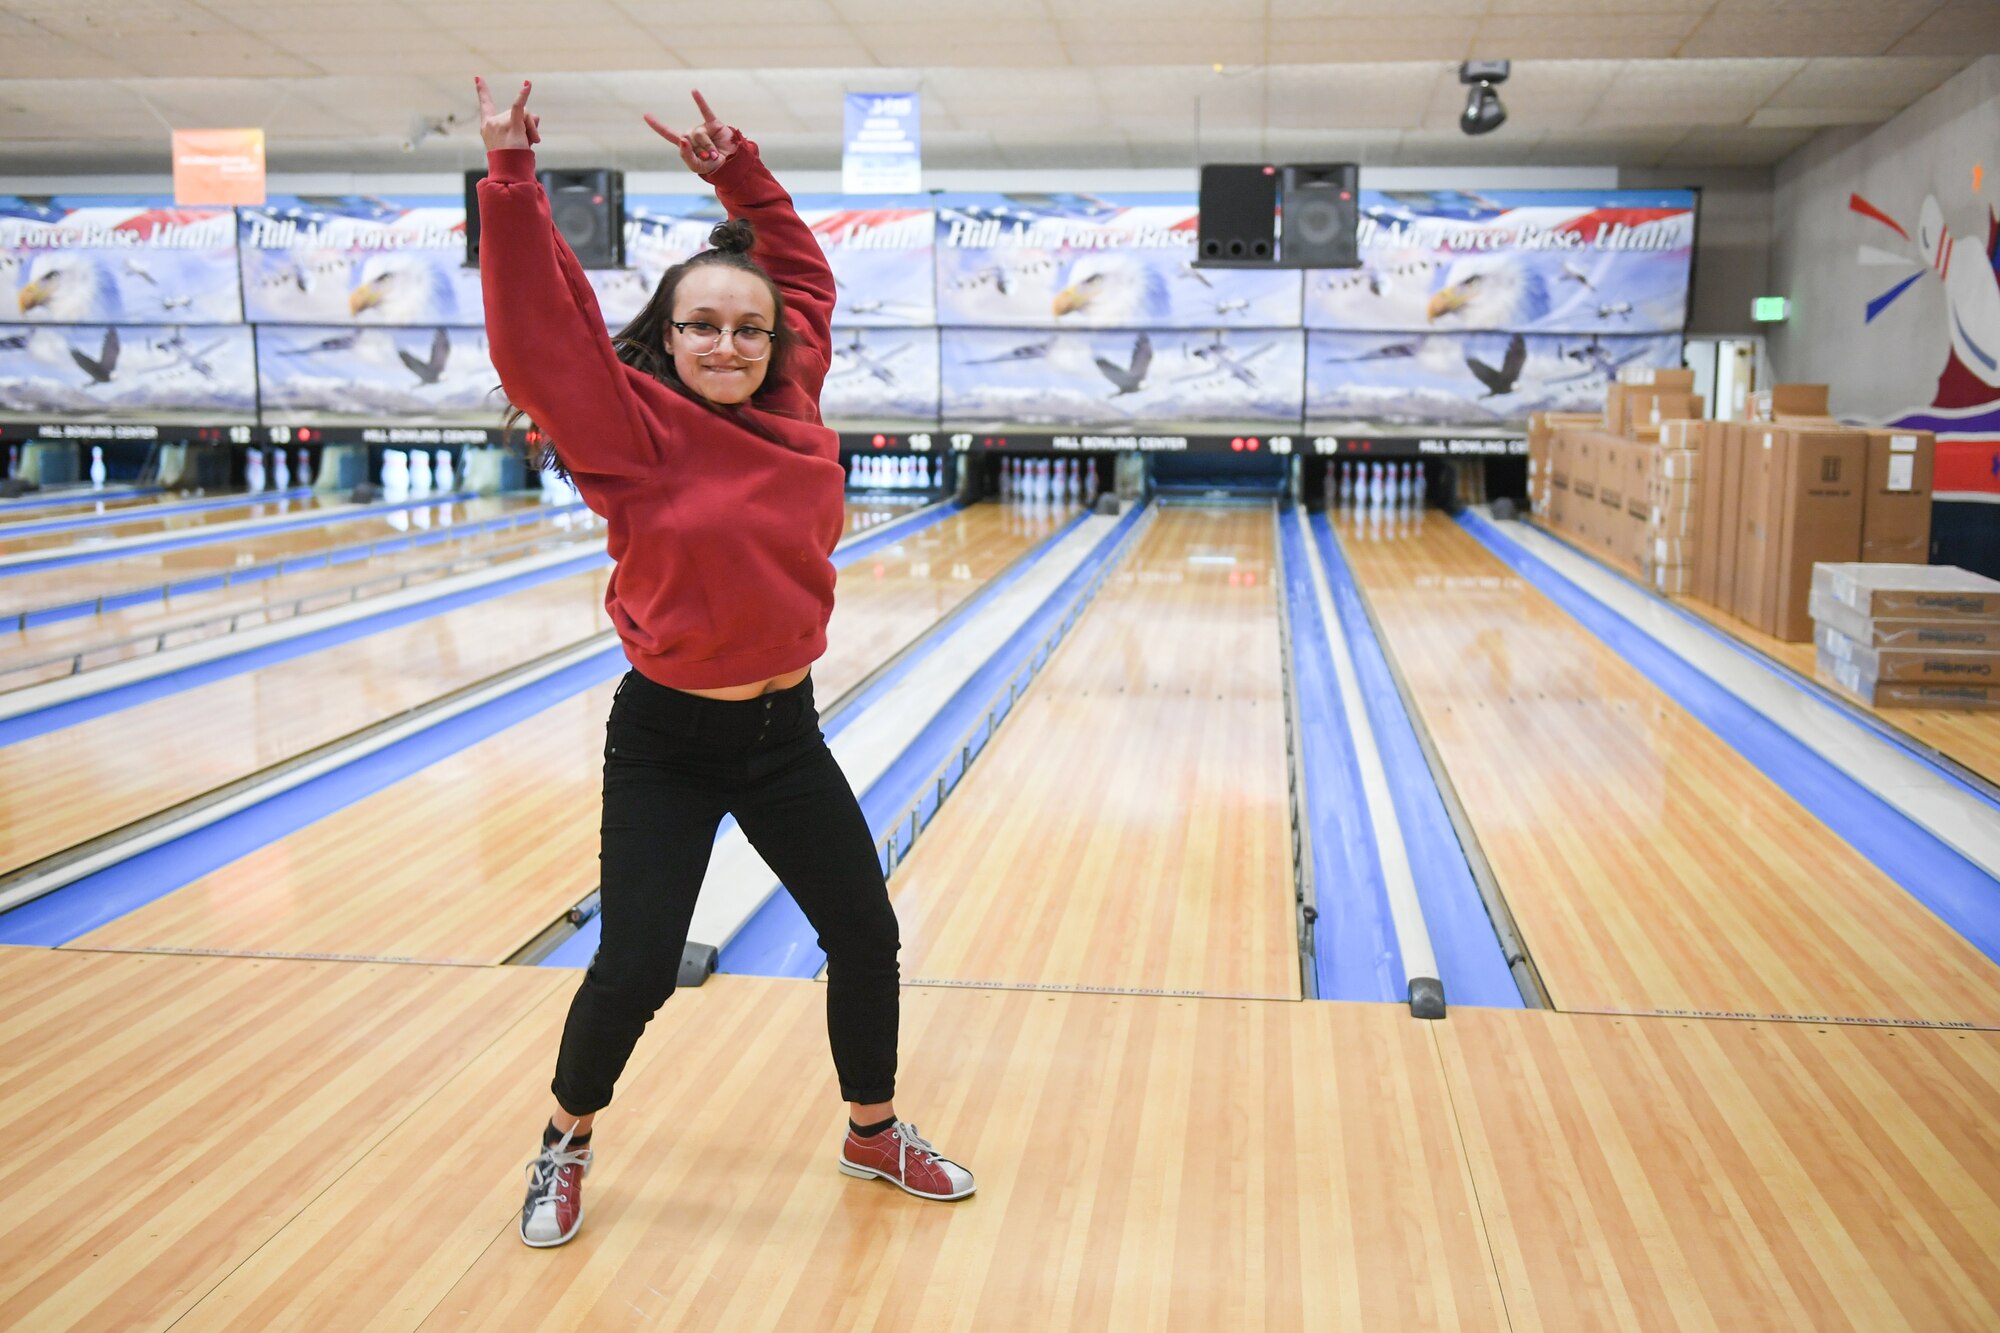 Makayla Prewitt bowls a spare Jan. 30, 2019, at the bowling event held by Exceptional Family Member Program-Family Support at Hill Air Force Base, Utah. (U.S. Air Force photo by Cynthia Griggs)